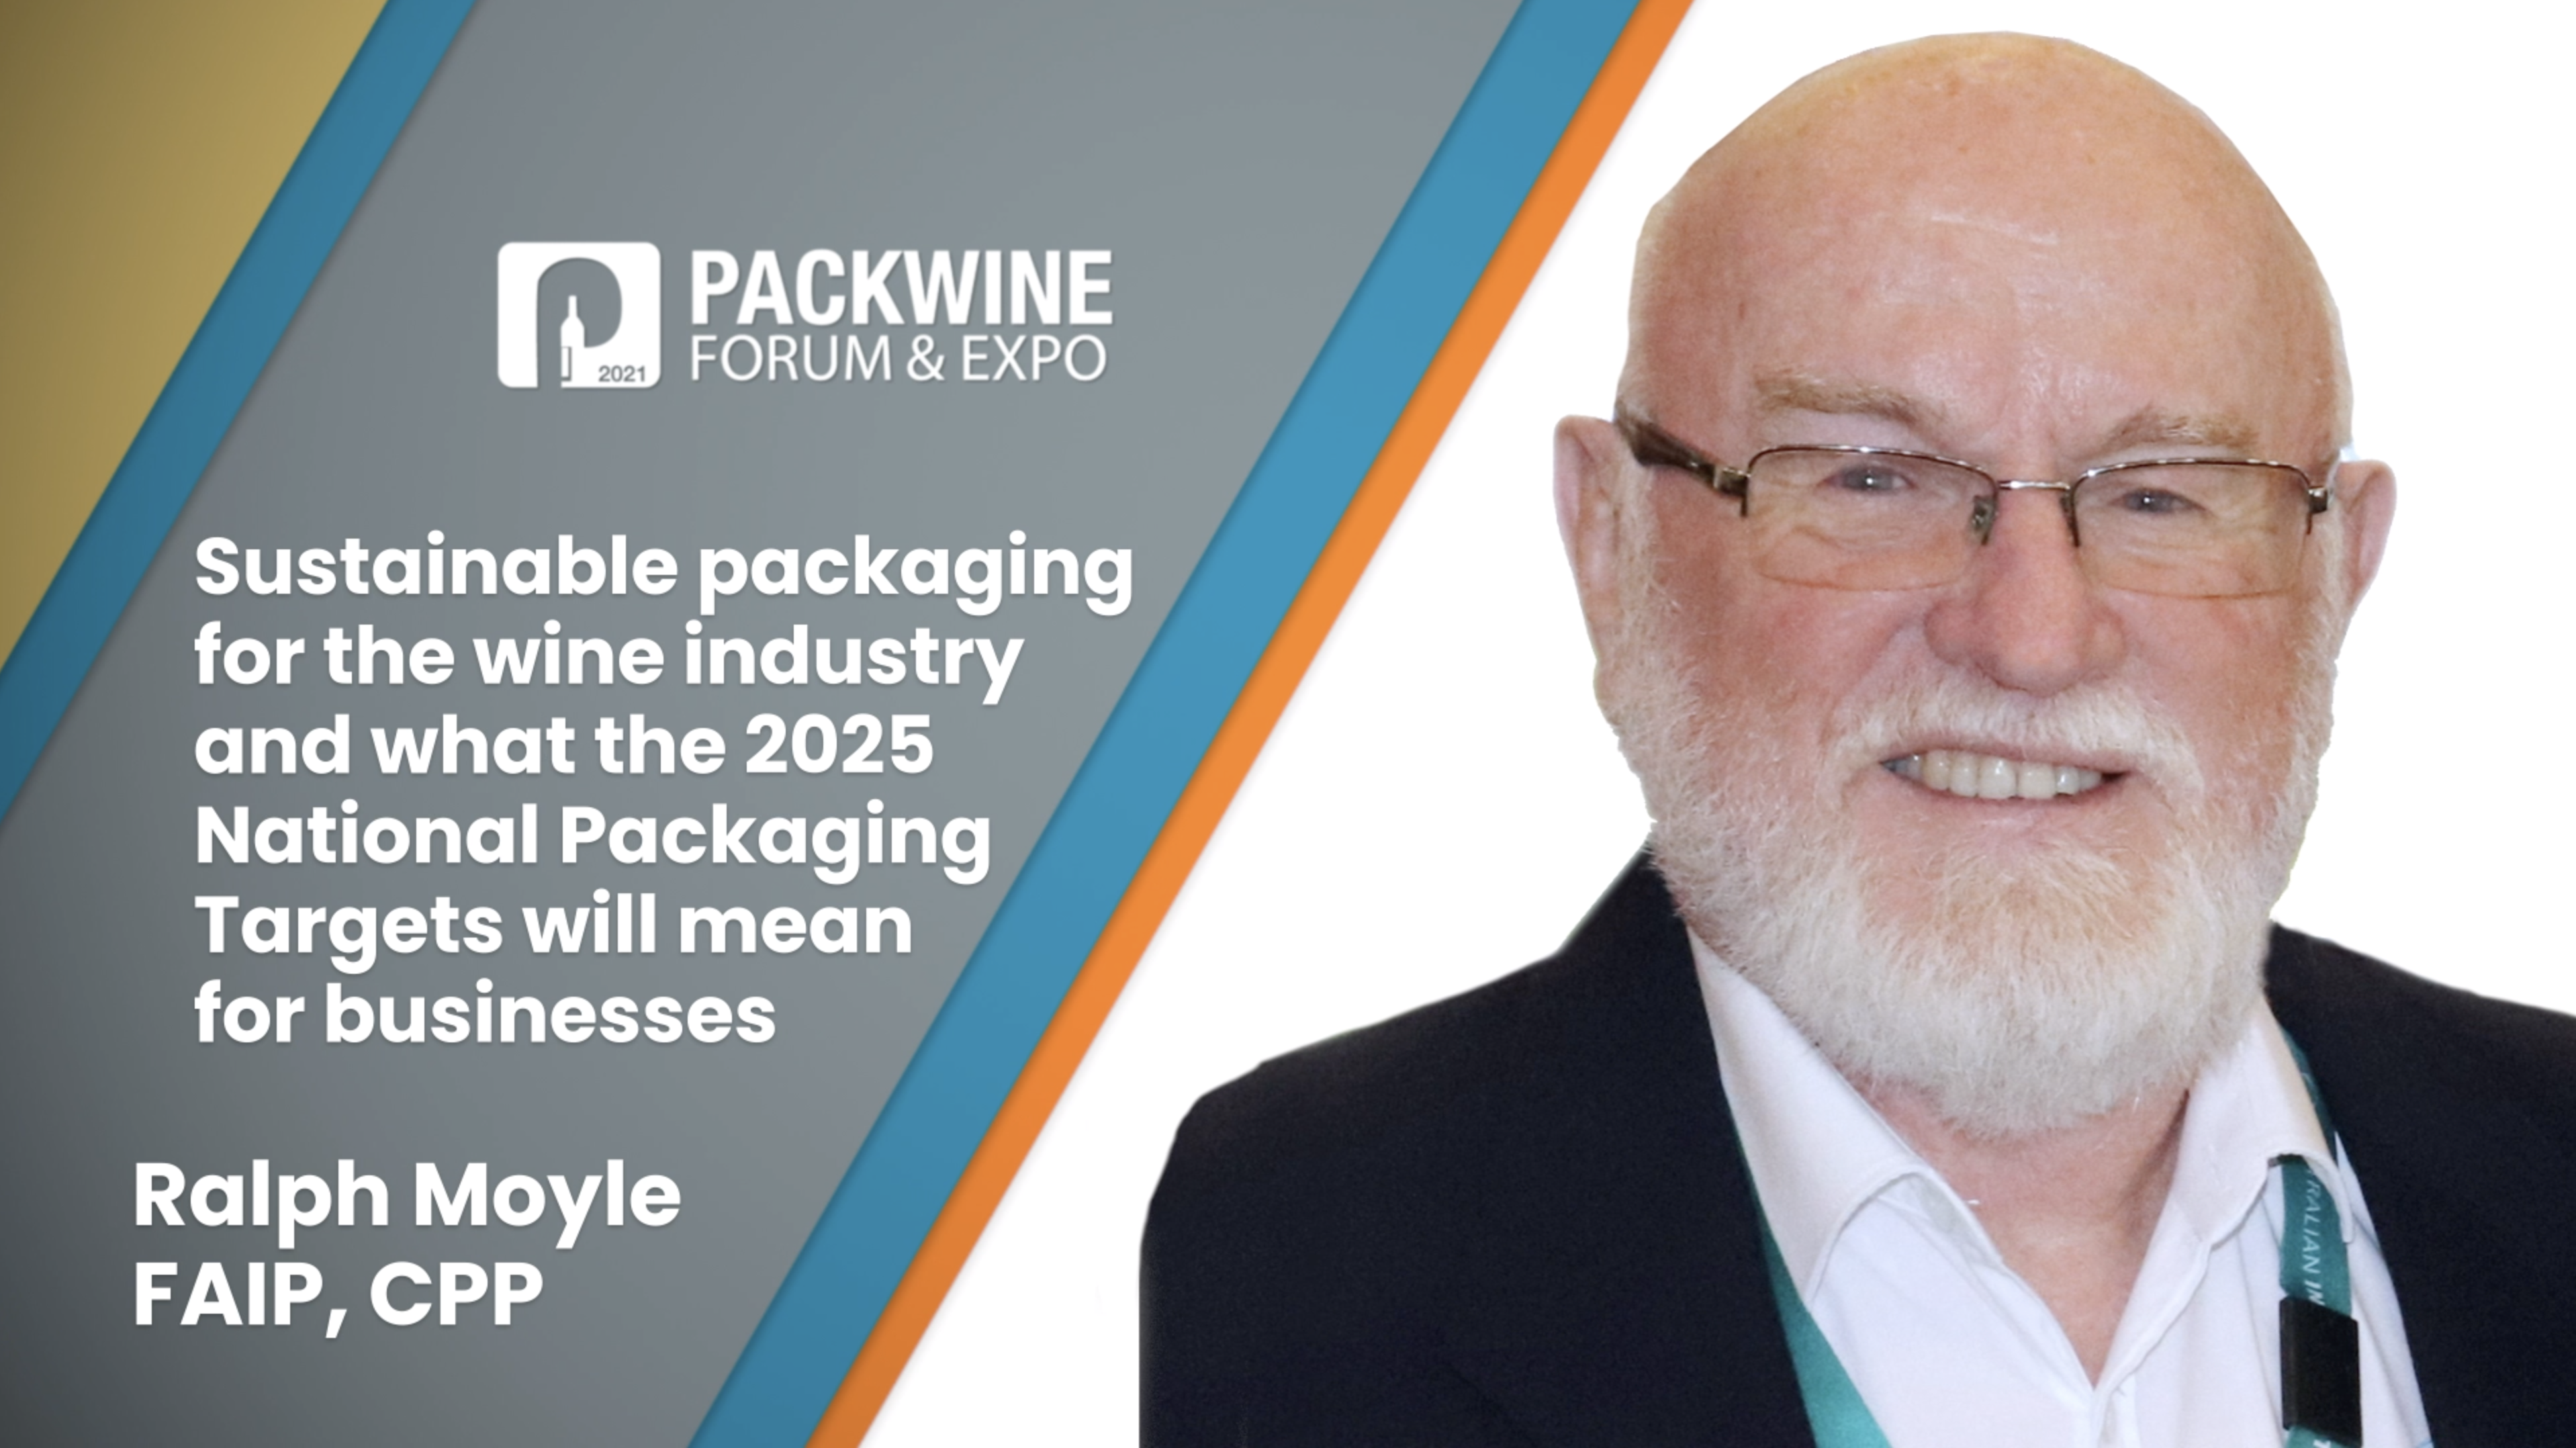 Sustainable packaging for the wine industry and what the 2025 National Packaging Targets will mean for businesses